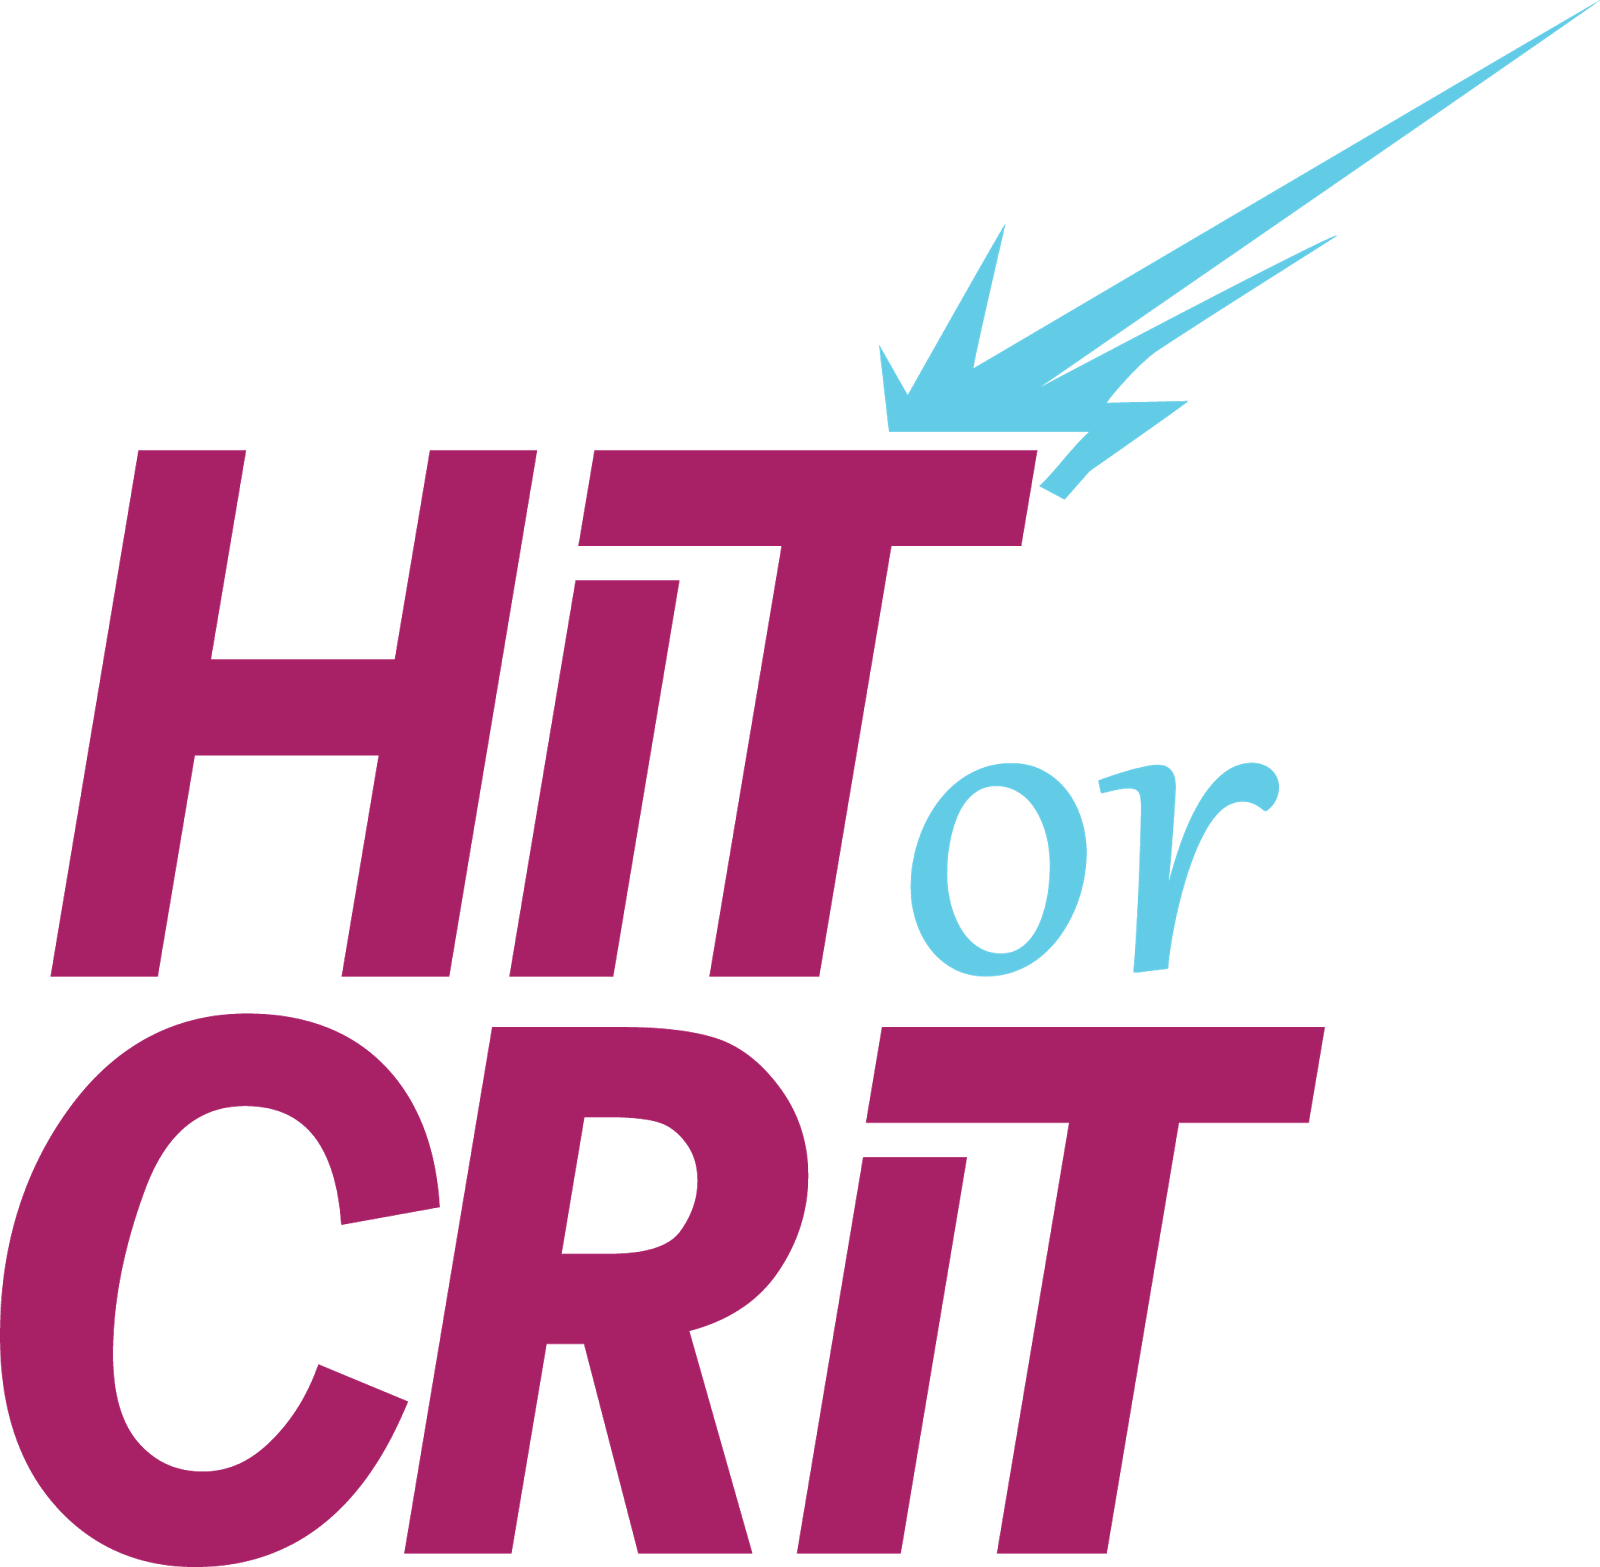 Hit or Crit